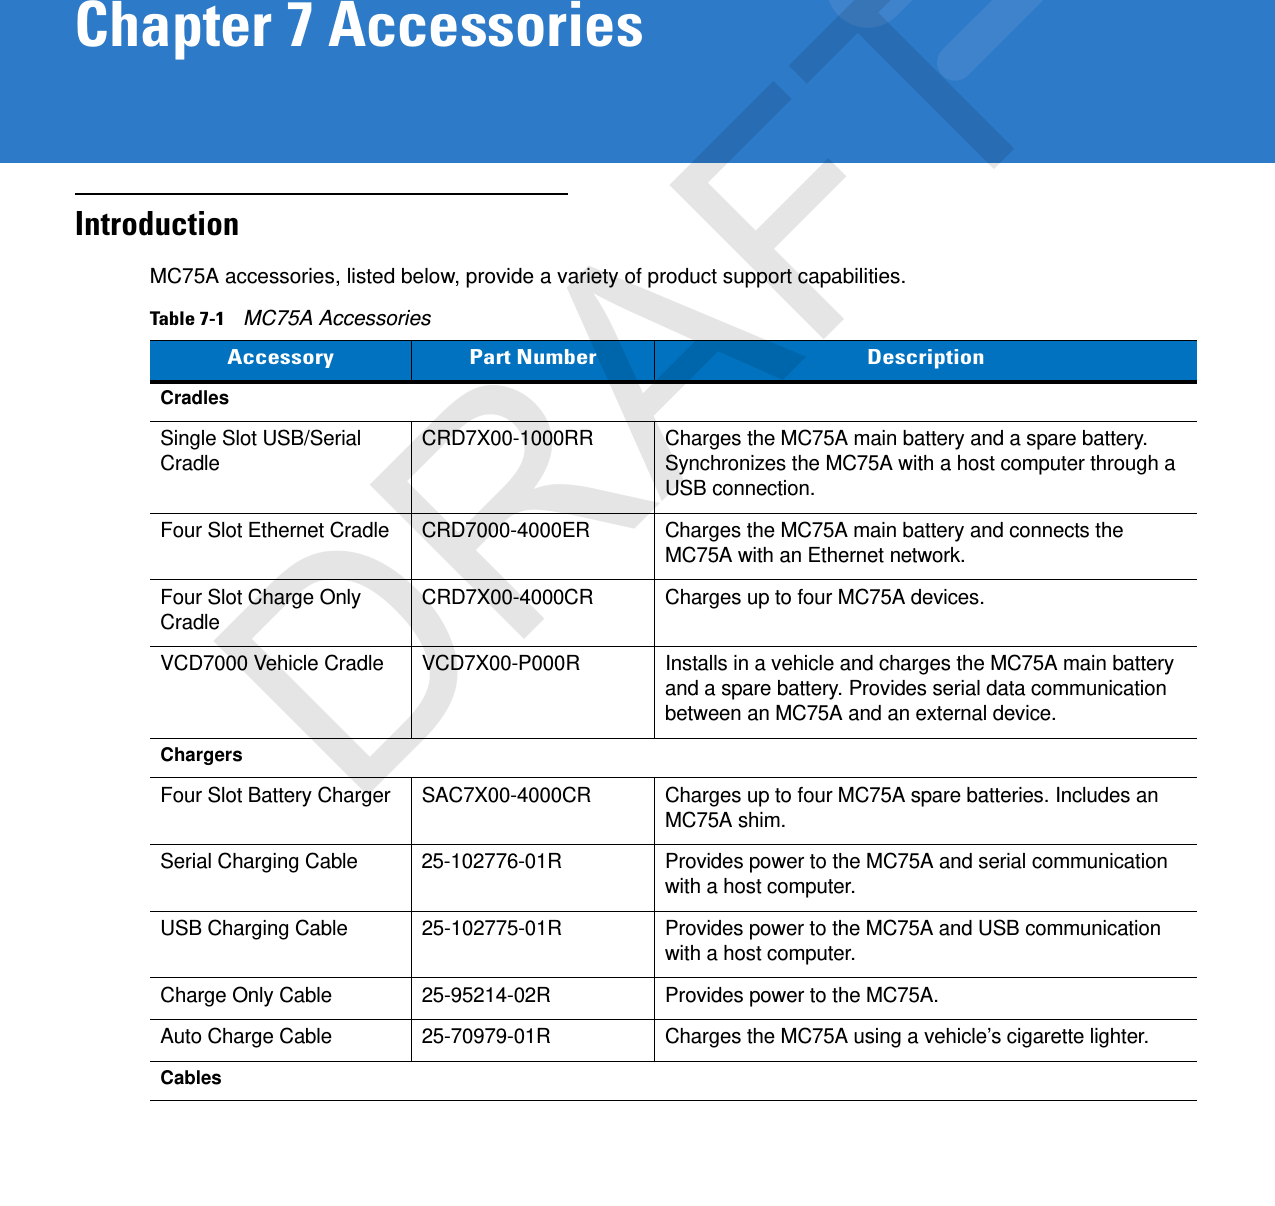 Chapter 7 AccessoriesIntroductionMC75A accessories, listed below, provide a variety of product support capabilities.Table 7-1    MC75A AccessoriesAccessory Part Number DescriptionCradlesSingle Slot USB/Serial Cradle CRD7X00-1000RR Charges the MC75A main battery and a spare battery. Synchronizes the MC75A with a host computer through a USB connection.Four Slot Ethernet Cradle CRD7000-4000ER Charges the MC75A main battery and connects the MC75A with an Ethernet network.Four Slot Charge Only Cradle CRD7X00-4000CR Charges up to four MC75A devices.VCD7000 Vehicle Cradle VCD7X00-P000R Installs in a vehicle and charges the MC75A main battery and a spare battery. Provides serial data communication between an MC75A and an external device.ChargersFour Slot Battery Charger SAC7X00-4000CR Charges up to four MC75A spare batteries. Includes an MC75A shim.Serial Charging Cable 25-102776-01R Provides power to the MC75A and serial communication with a host computer.USB Charging Cable 25-102775-01R Provides power to the MC75A and USB communication with a host computer.Charge Only Cable 25-95214-02R Provides power to the MC75A.Auto Charge Cable 25-70979-01R Charges the MC75A using a vehicle’s cigarette lighter.CablesDRAFT